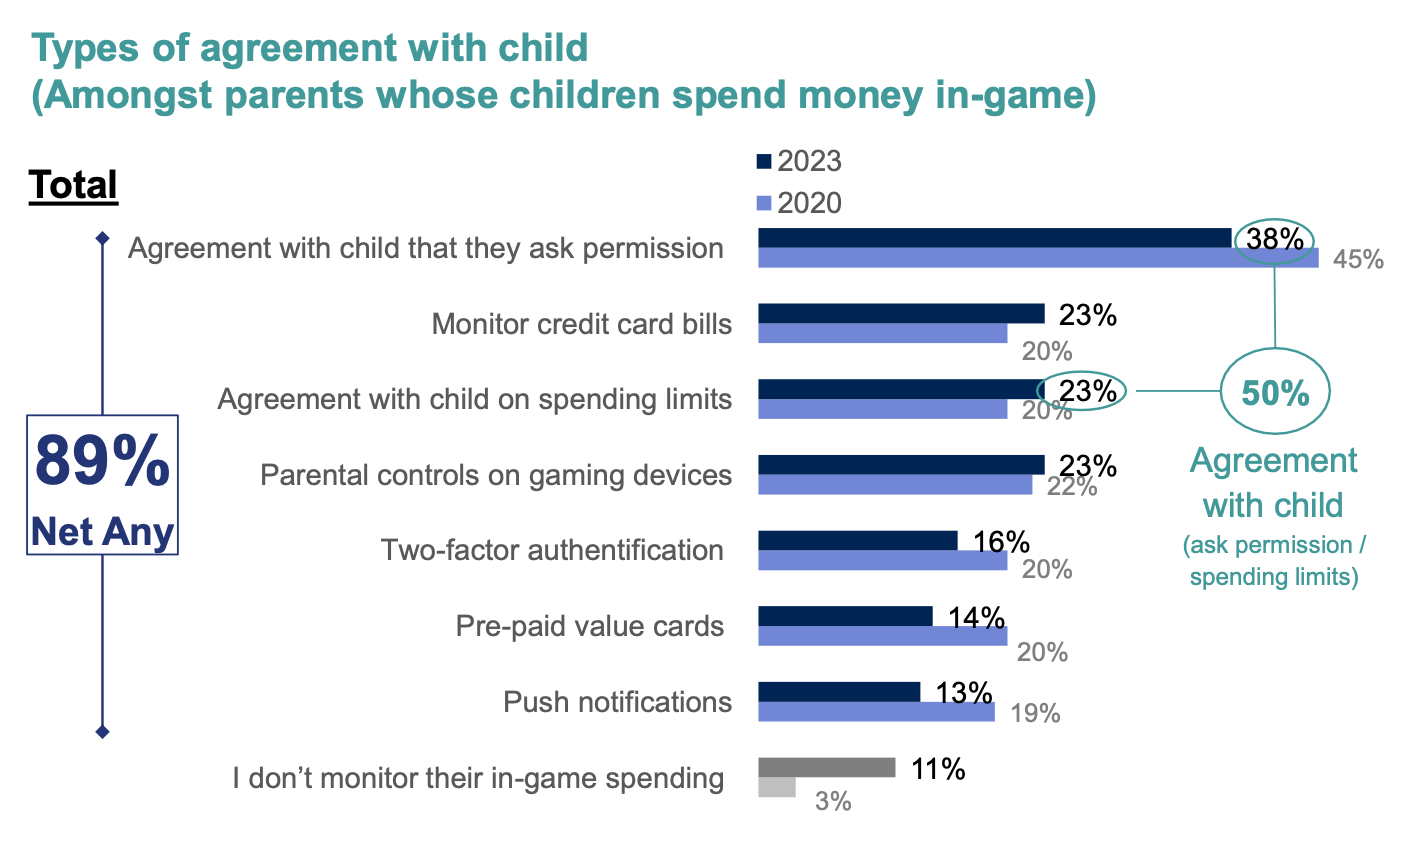 Agreement children make in-game purchases